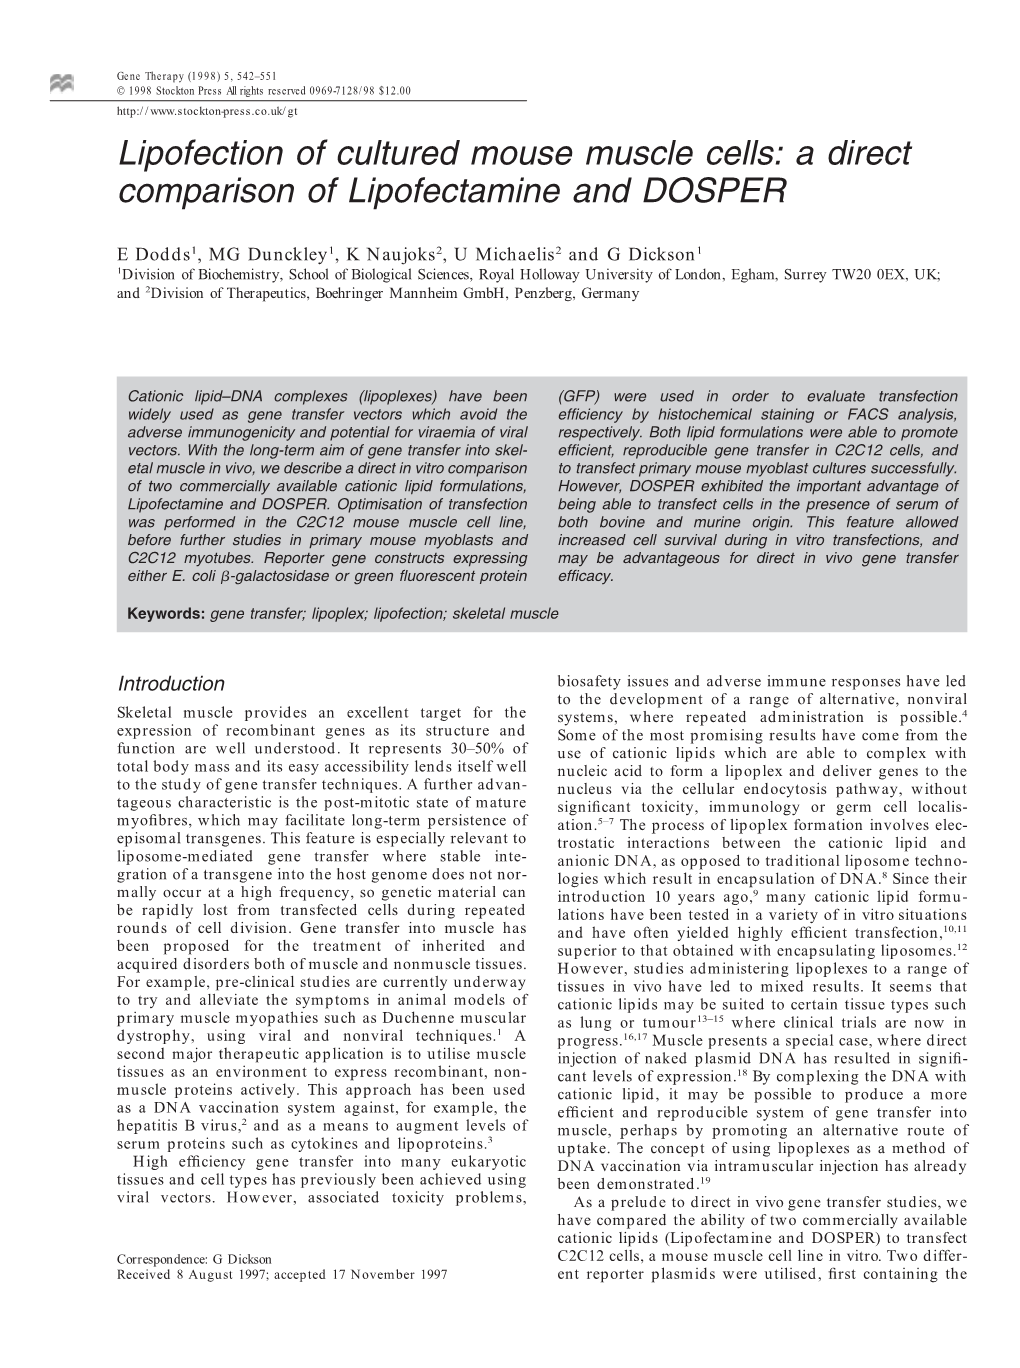 Lipofection of Cultured Mouse Muscle Cells: a Direct Comparison of Lipofectamine and DOSPER